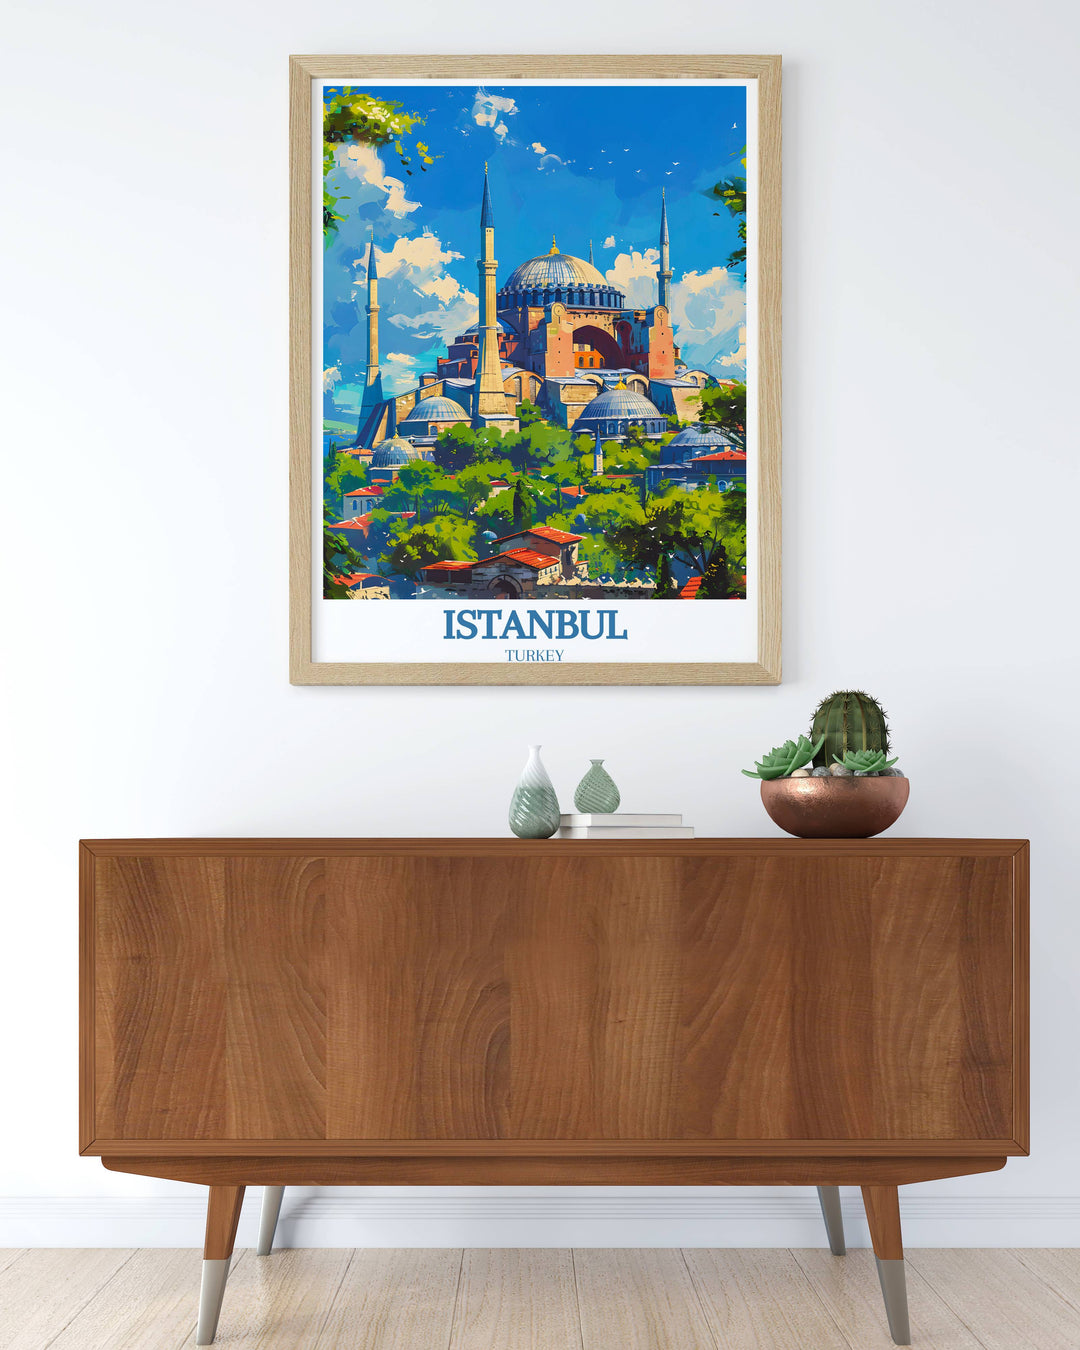 Turkey poster with the Hagia Sophia prominently displayed against the backdrop of Istanbuls skyline, capturing the essence of this ancient city.